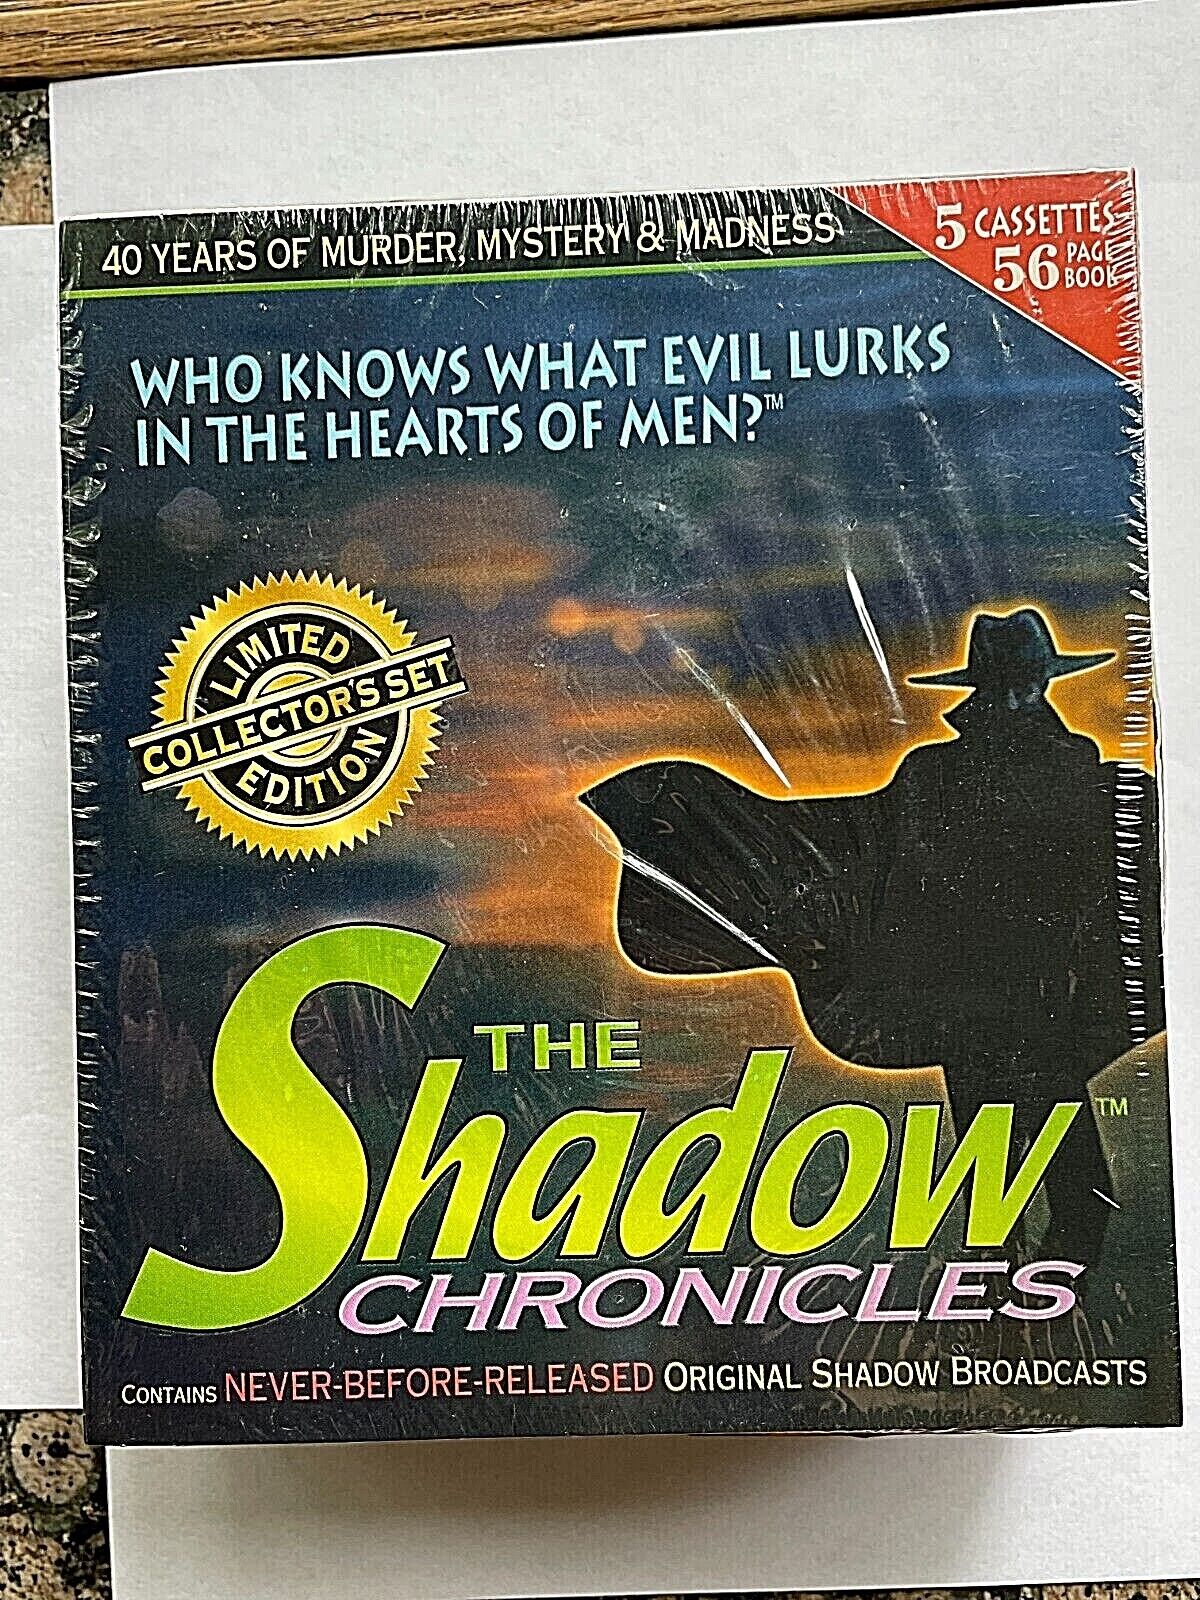 VTG 1996 THE SHADOW CHRONICLES 56 Page Book & 5 Audio Cassettes - LTD ED Sealed